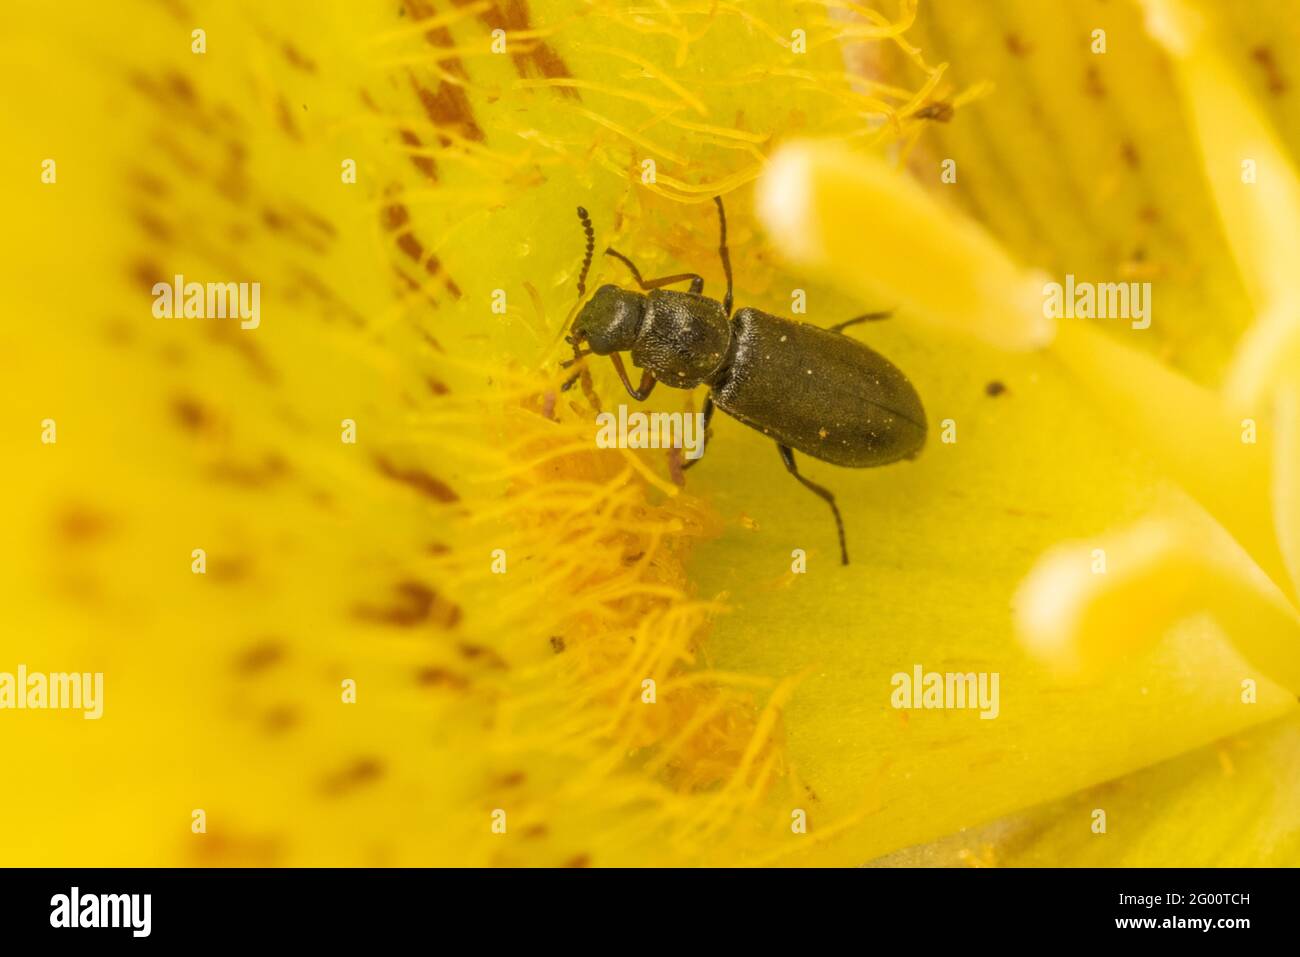 Beetles feed at the nectaries within a yellow mariposa lily flower (Calochortus luteus) in California. The beetles are important insect pollinators. Stock Photo